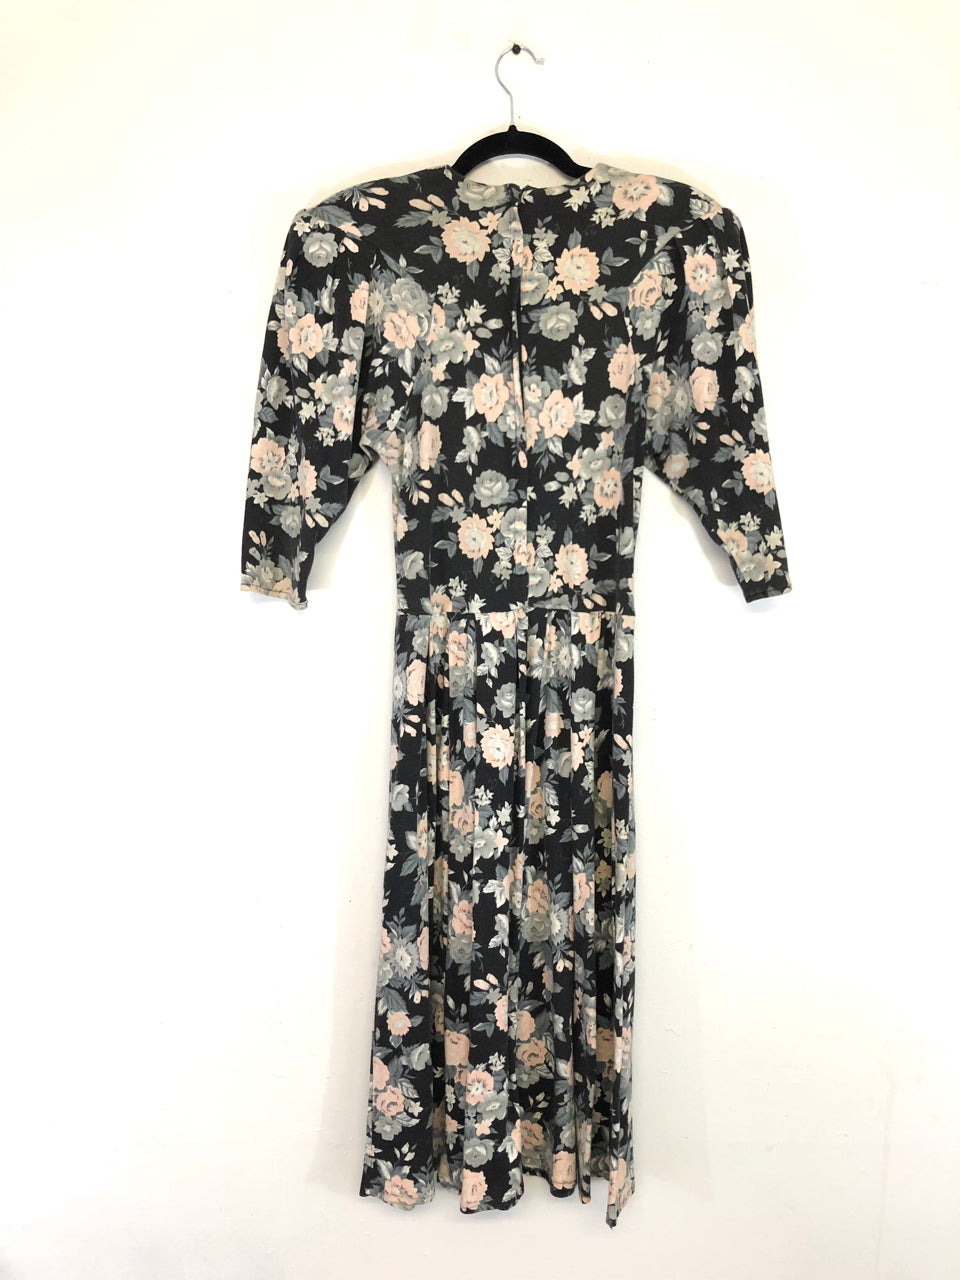 By Choice Floral Dress